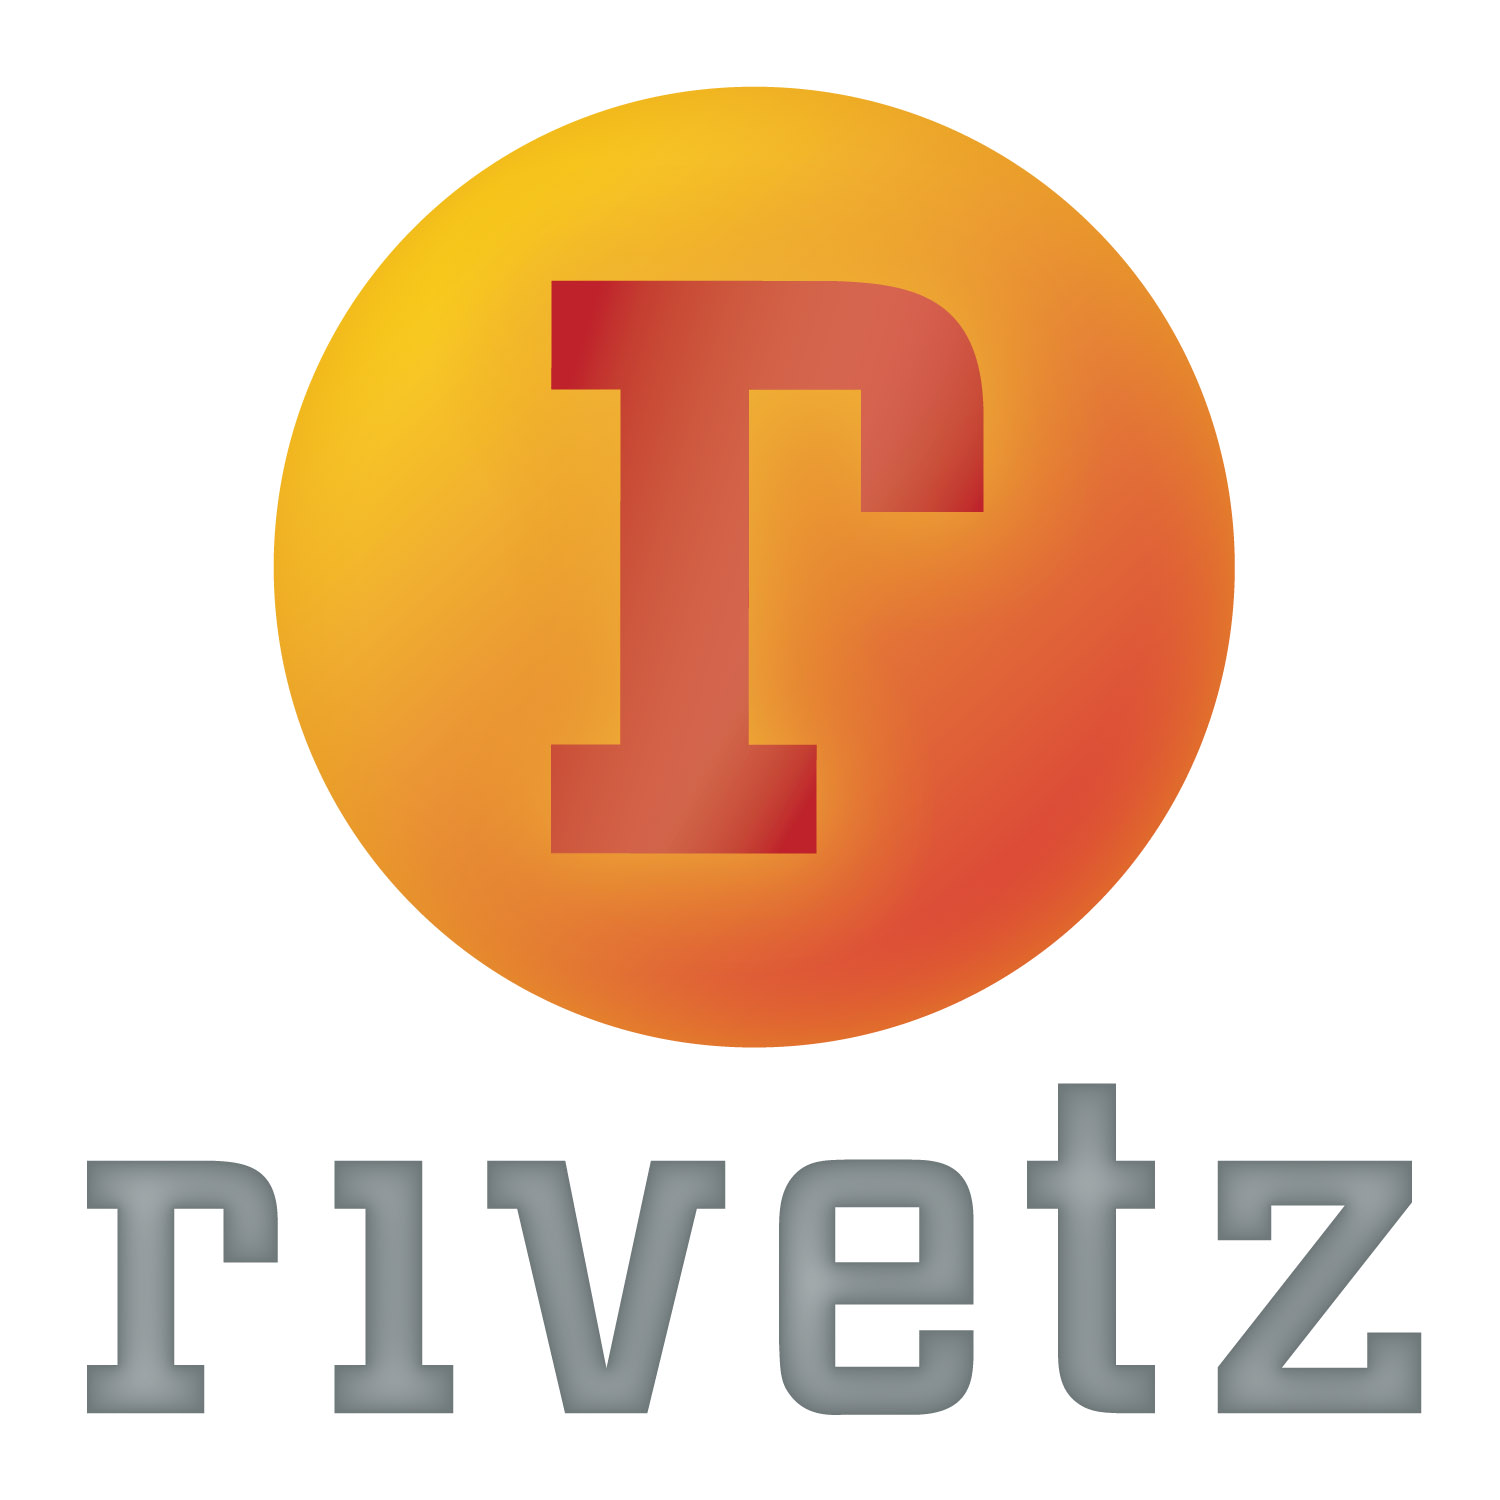 Rivetz develops secure payment solution for Android to support Bitcoin